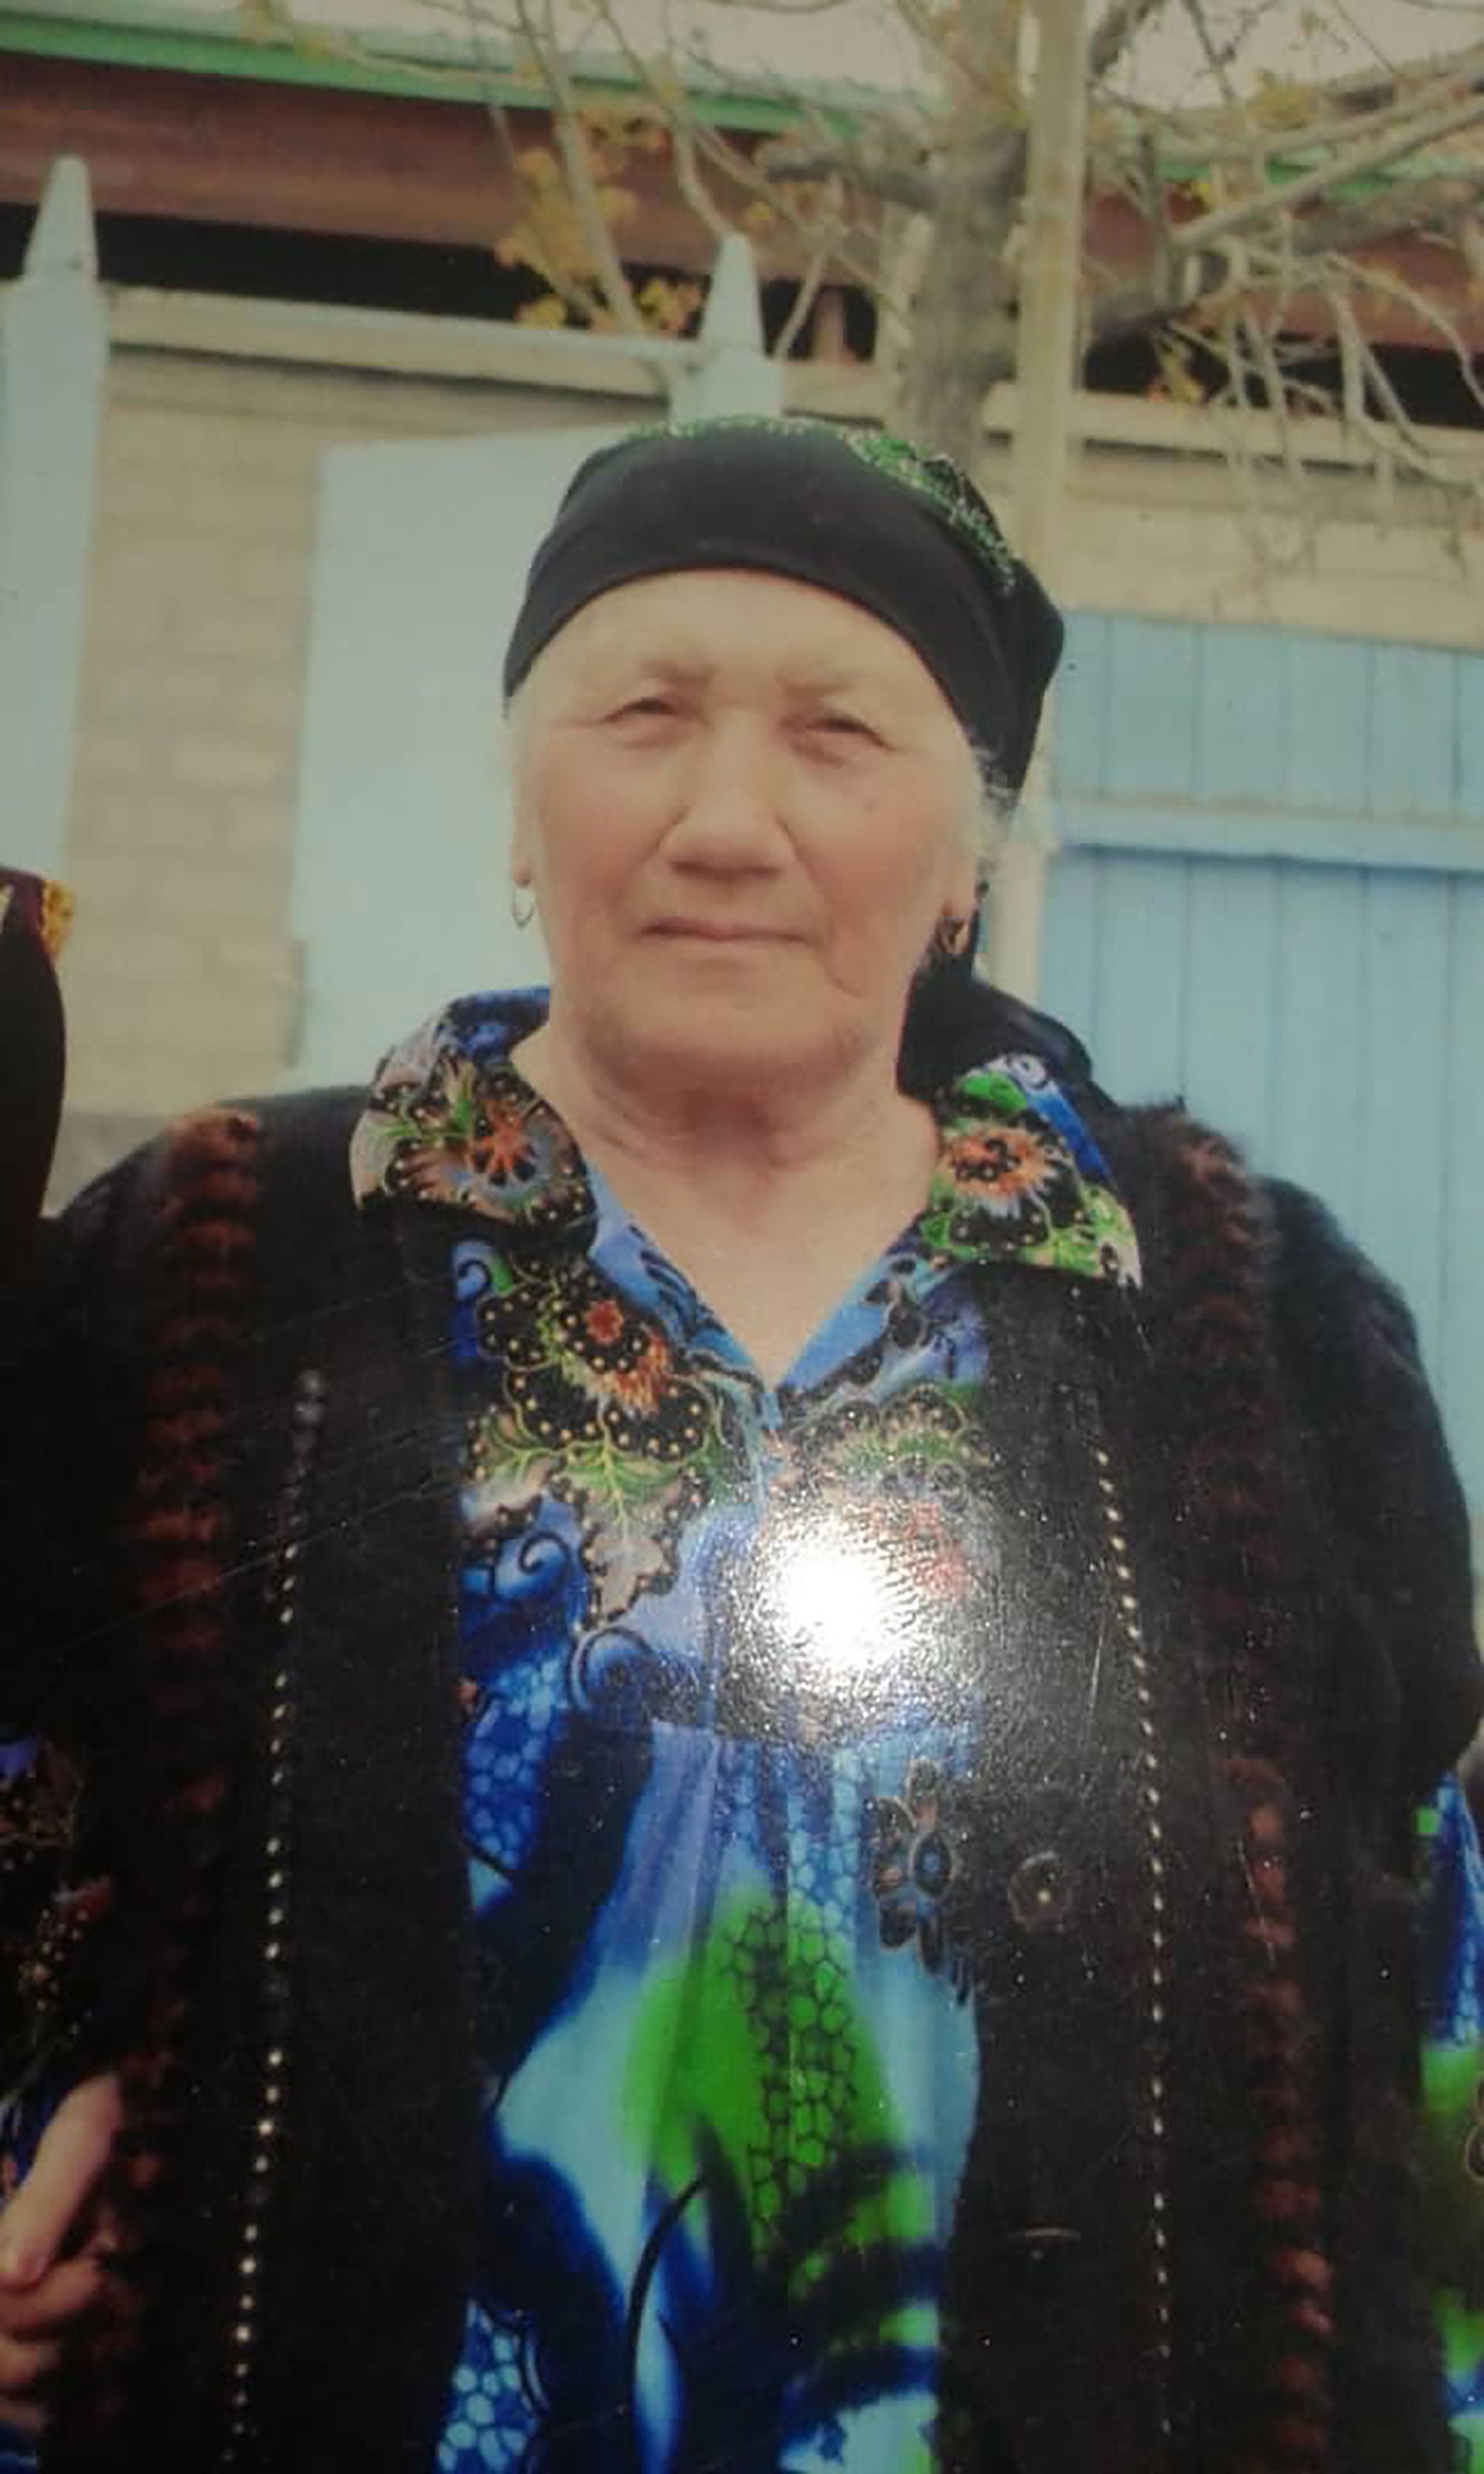 83-year-old Kutbineso Hamidova was killed on September 16, 2022, when an artillery shell hit her home in the Tajik city of Khistevarz.